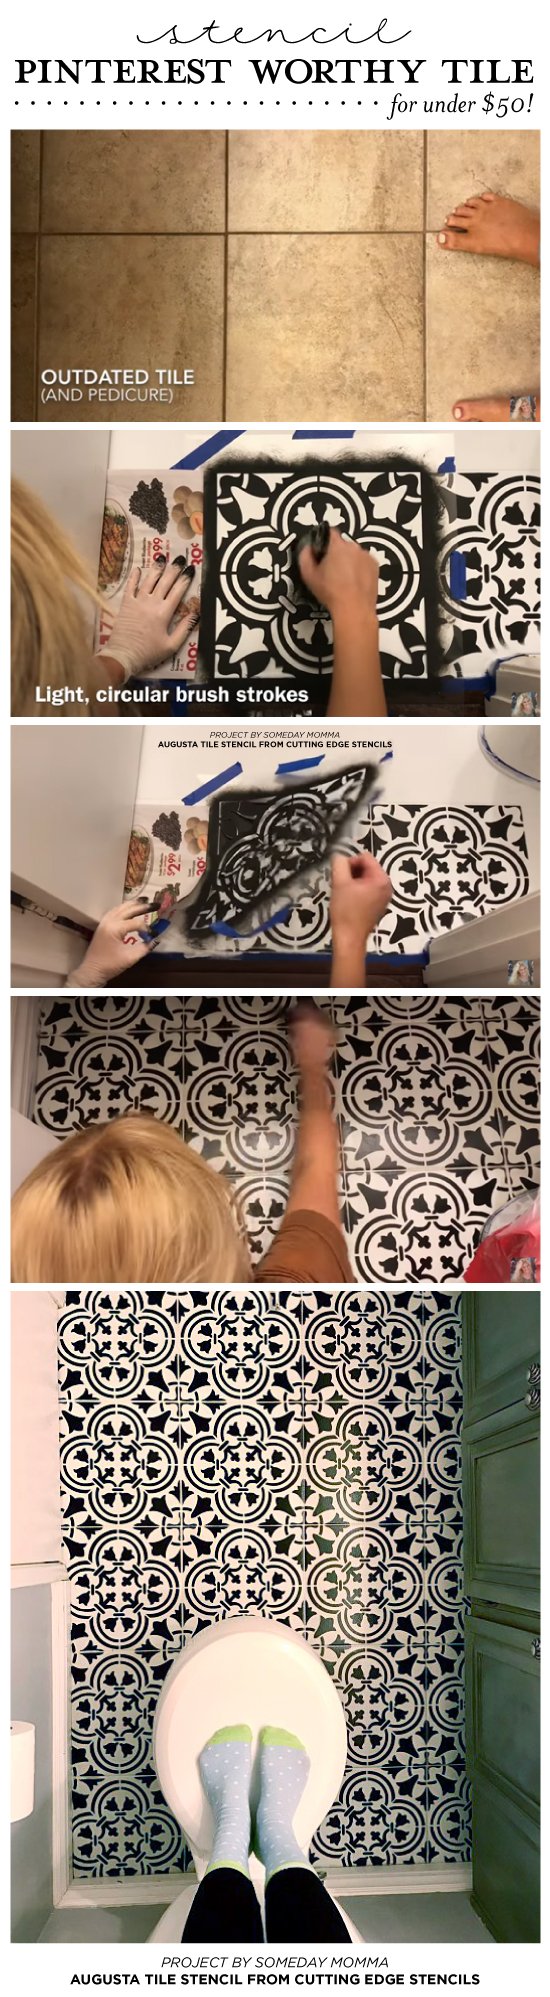 Cutting Edge Stencils shares a DIY painted and stenciled ceramic tile floor using the Augusta Tile pattern. http://www.cuttingedgestencils.com/augusta-tile-stencil-design-patchwork-tiles-stencils.html